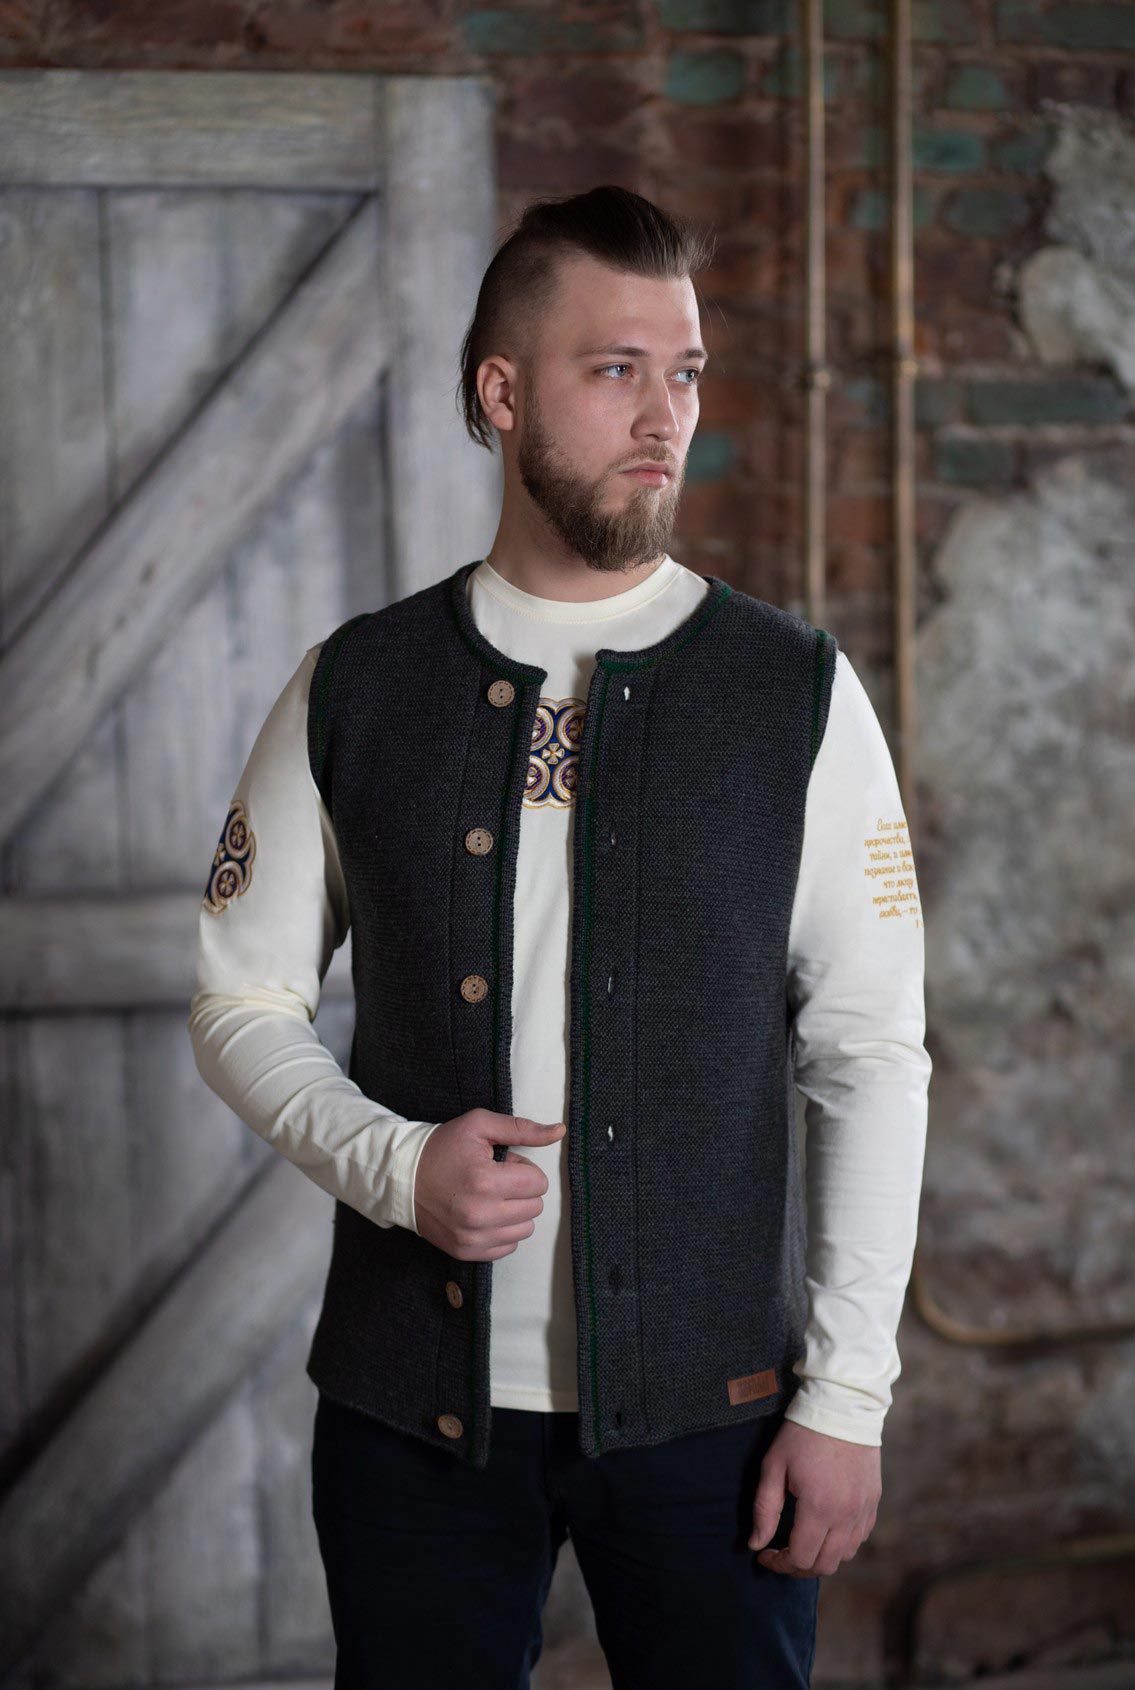 Waistcoat for the winter